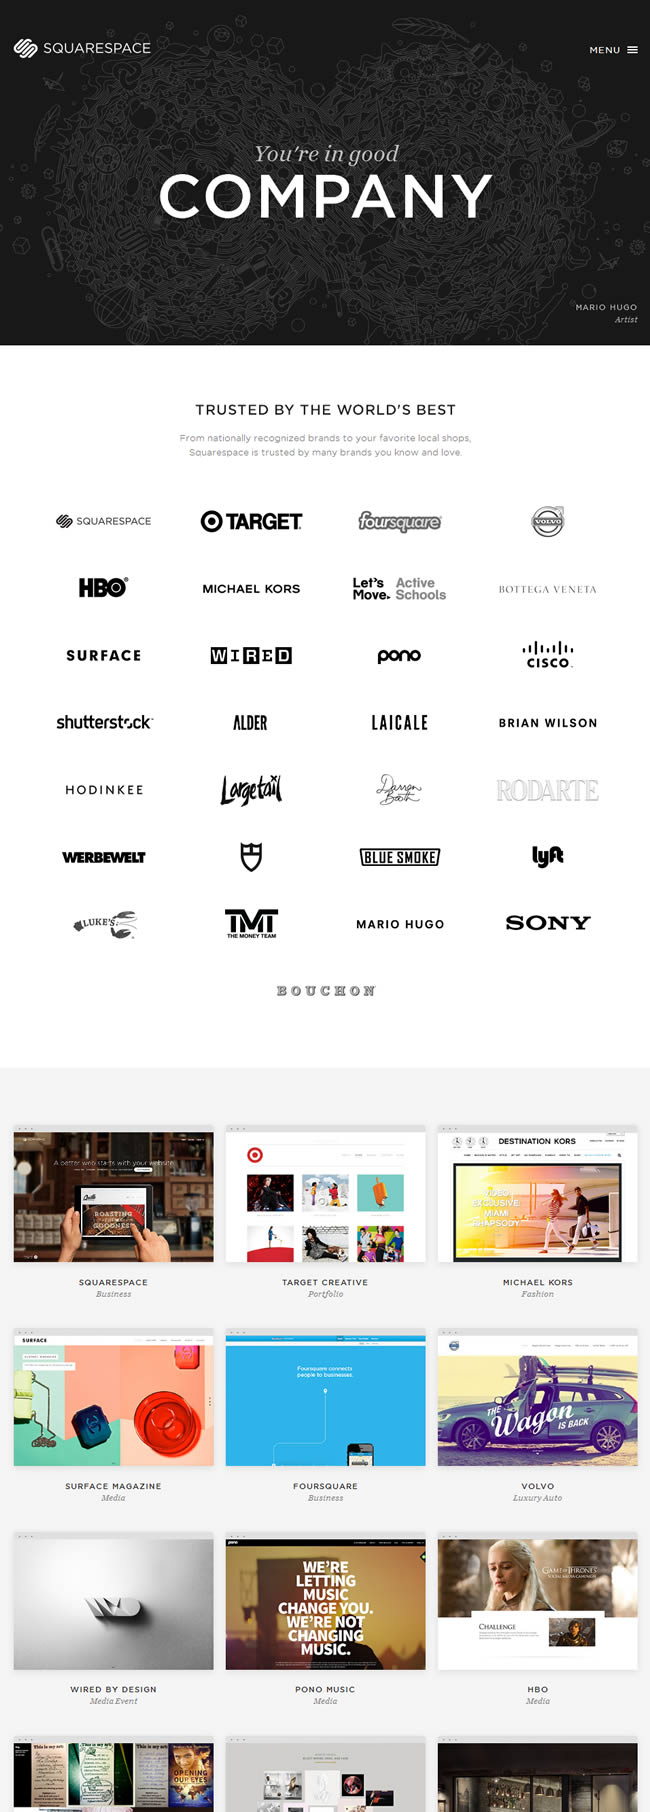 Squarespace customers page design example